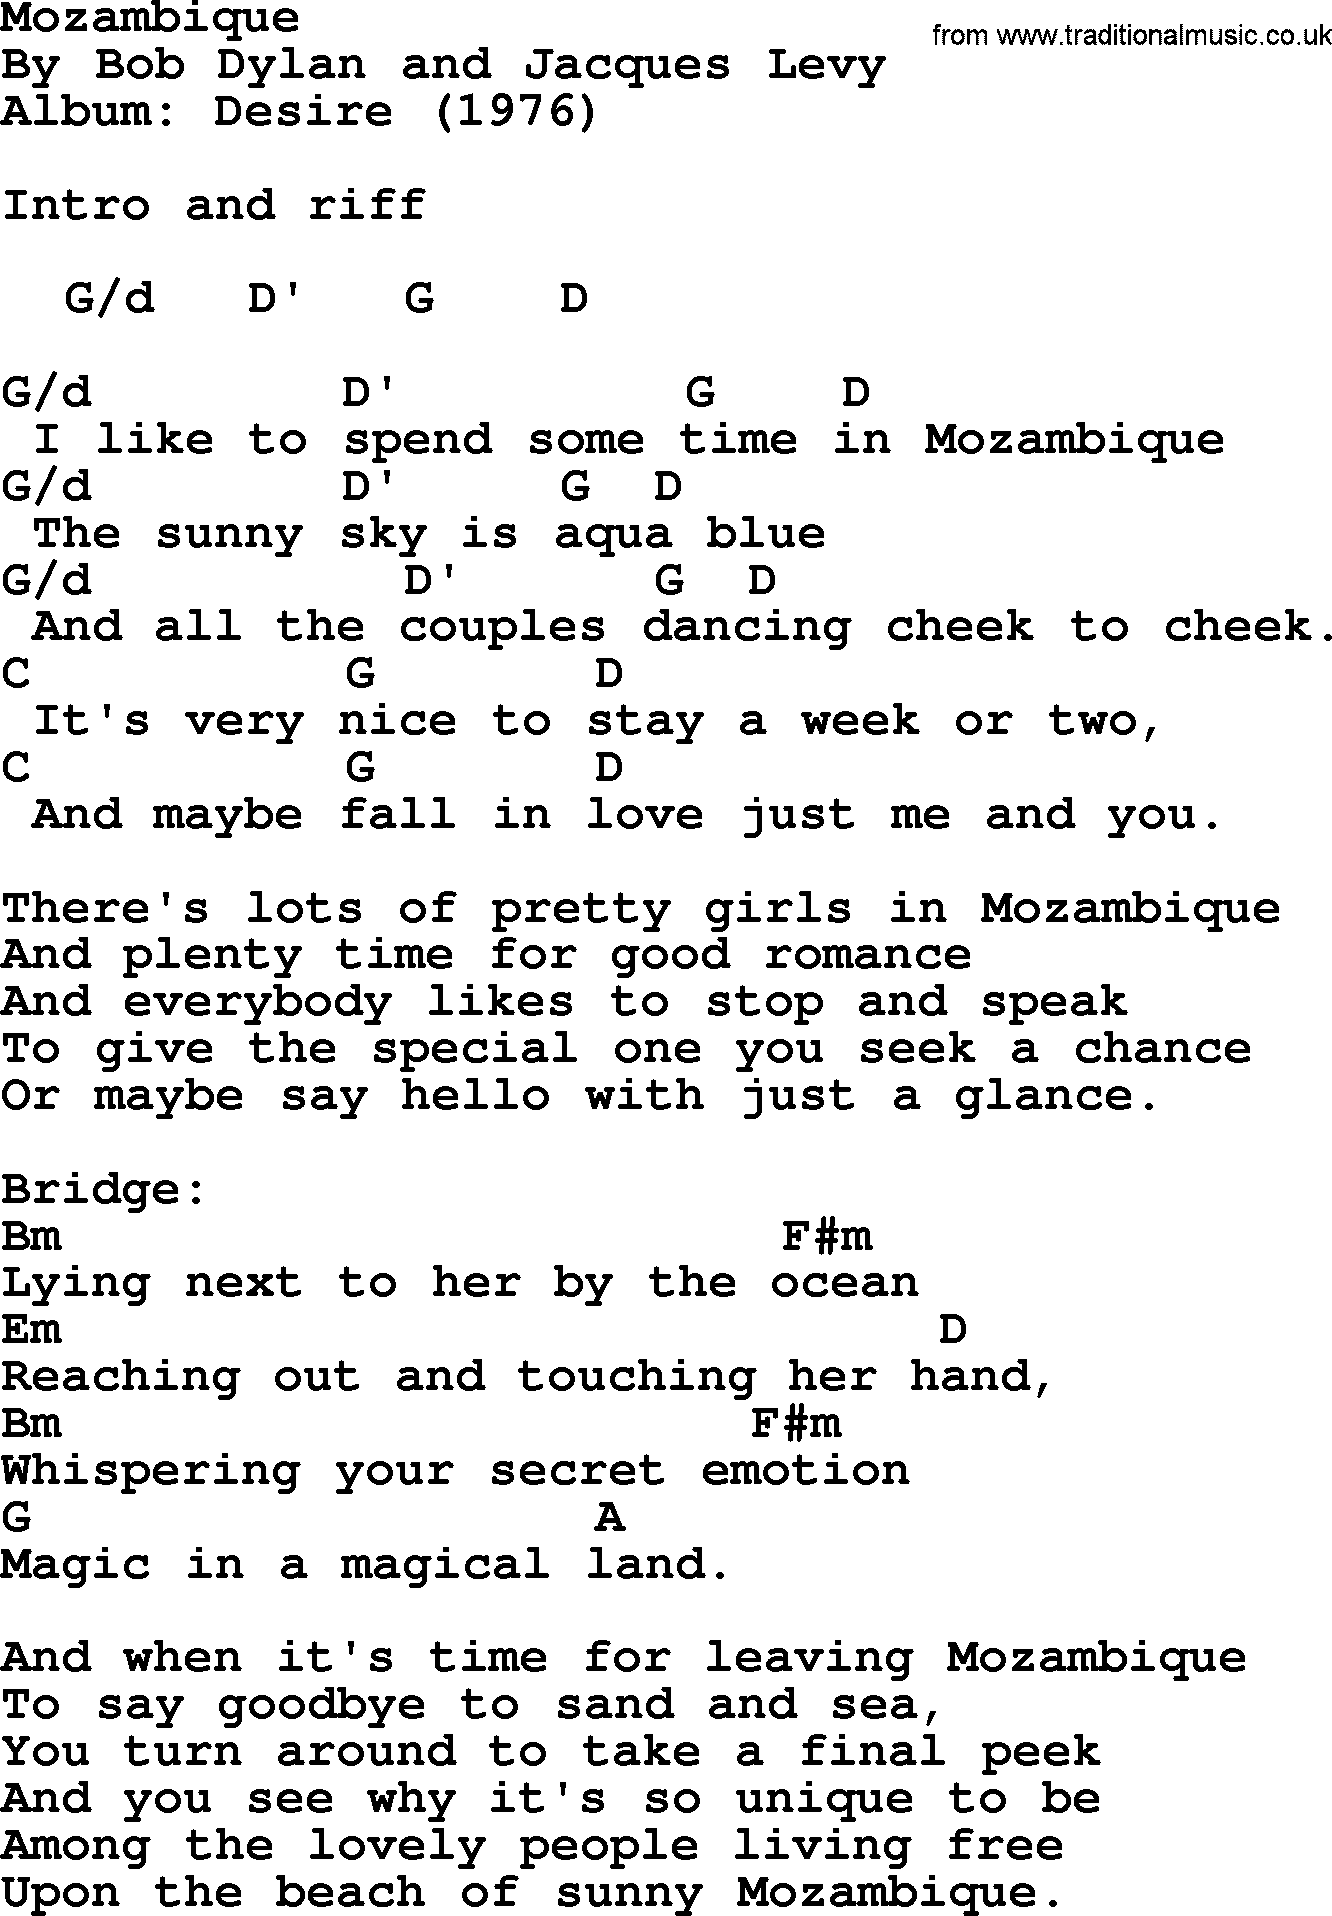 Bob Dylan song, lyrics with chords - Mozambique